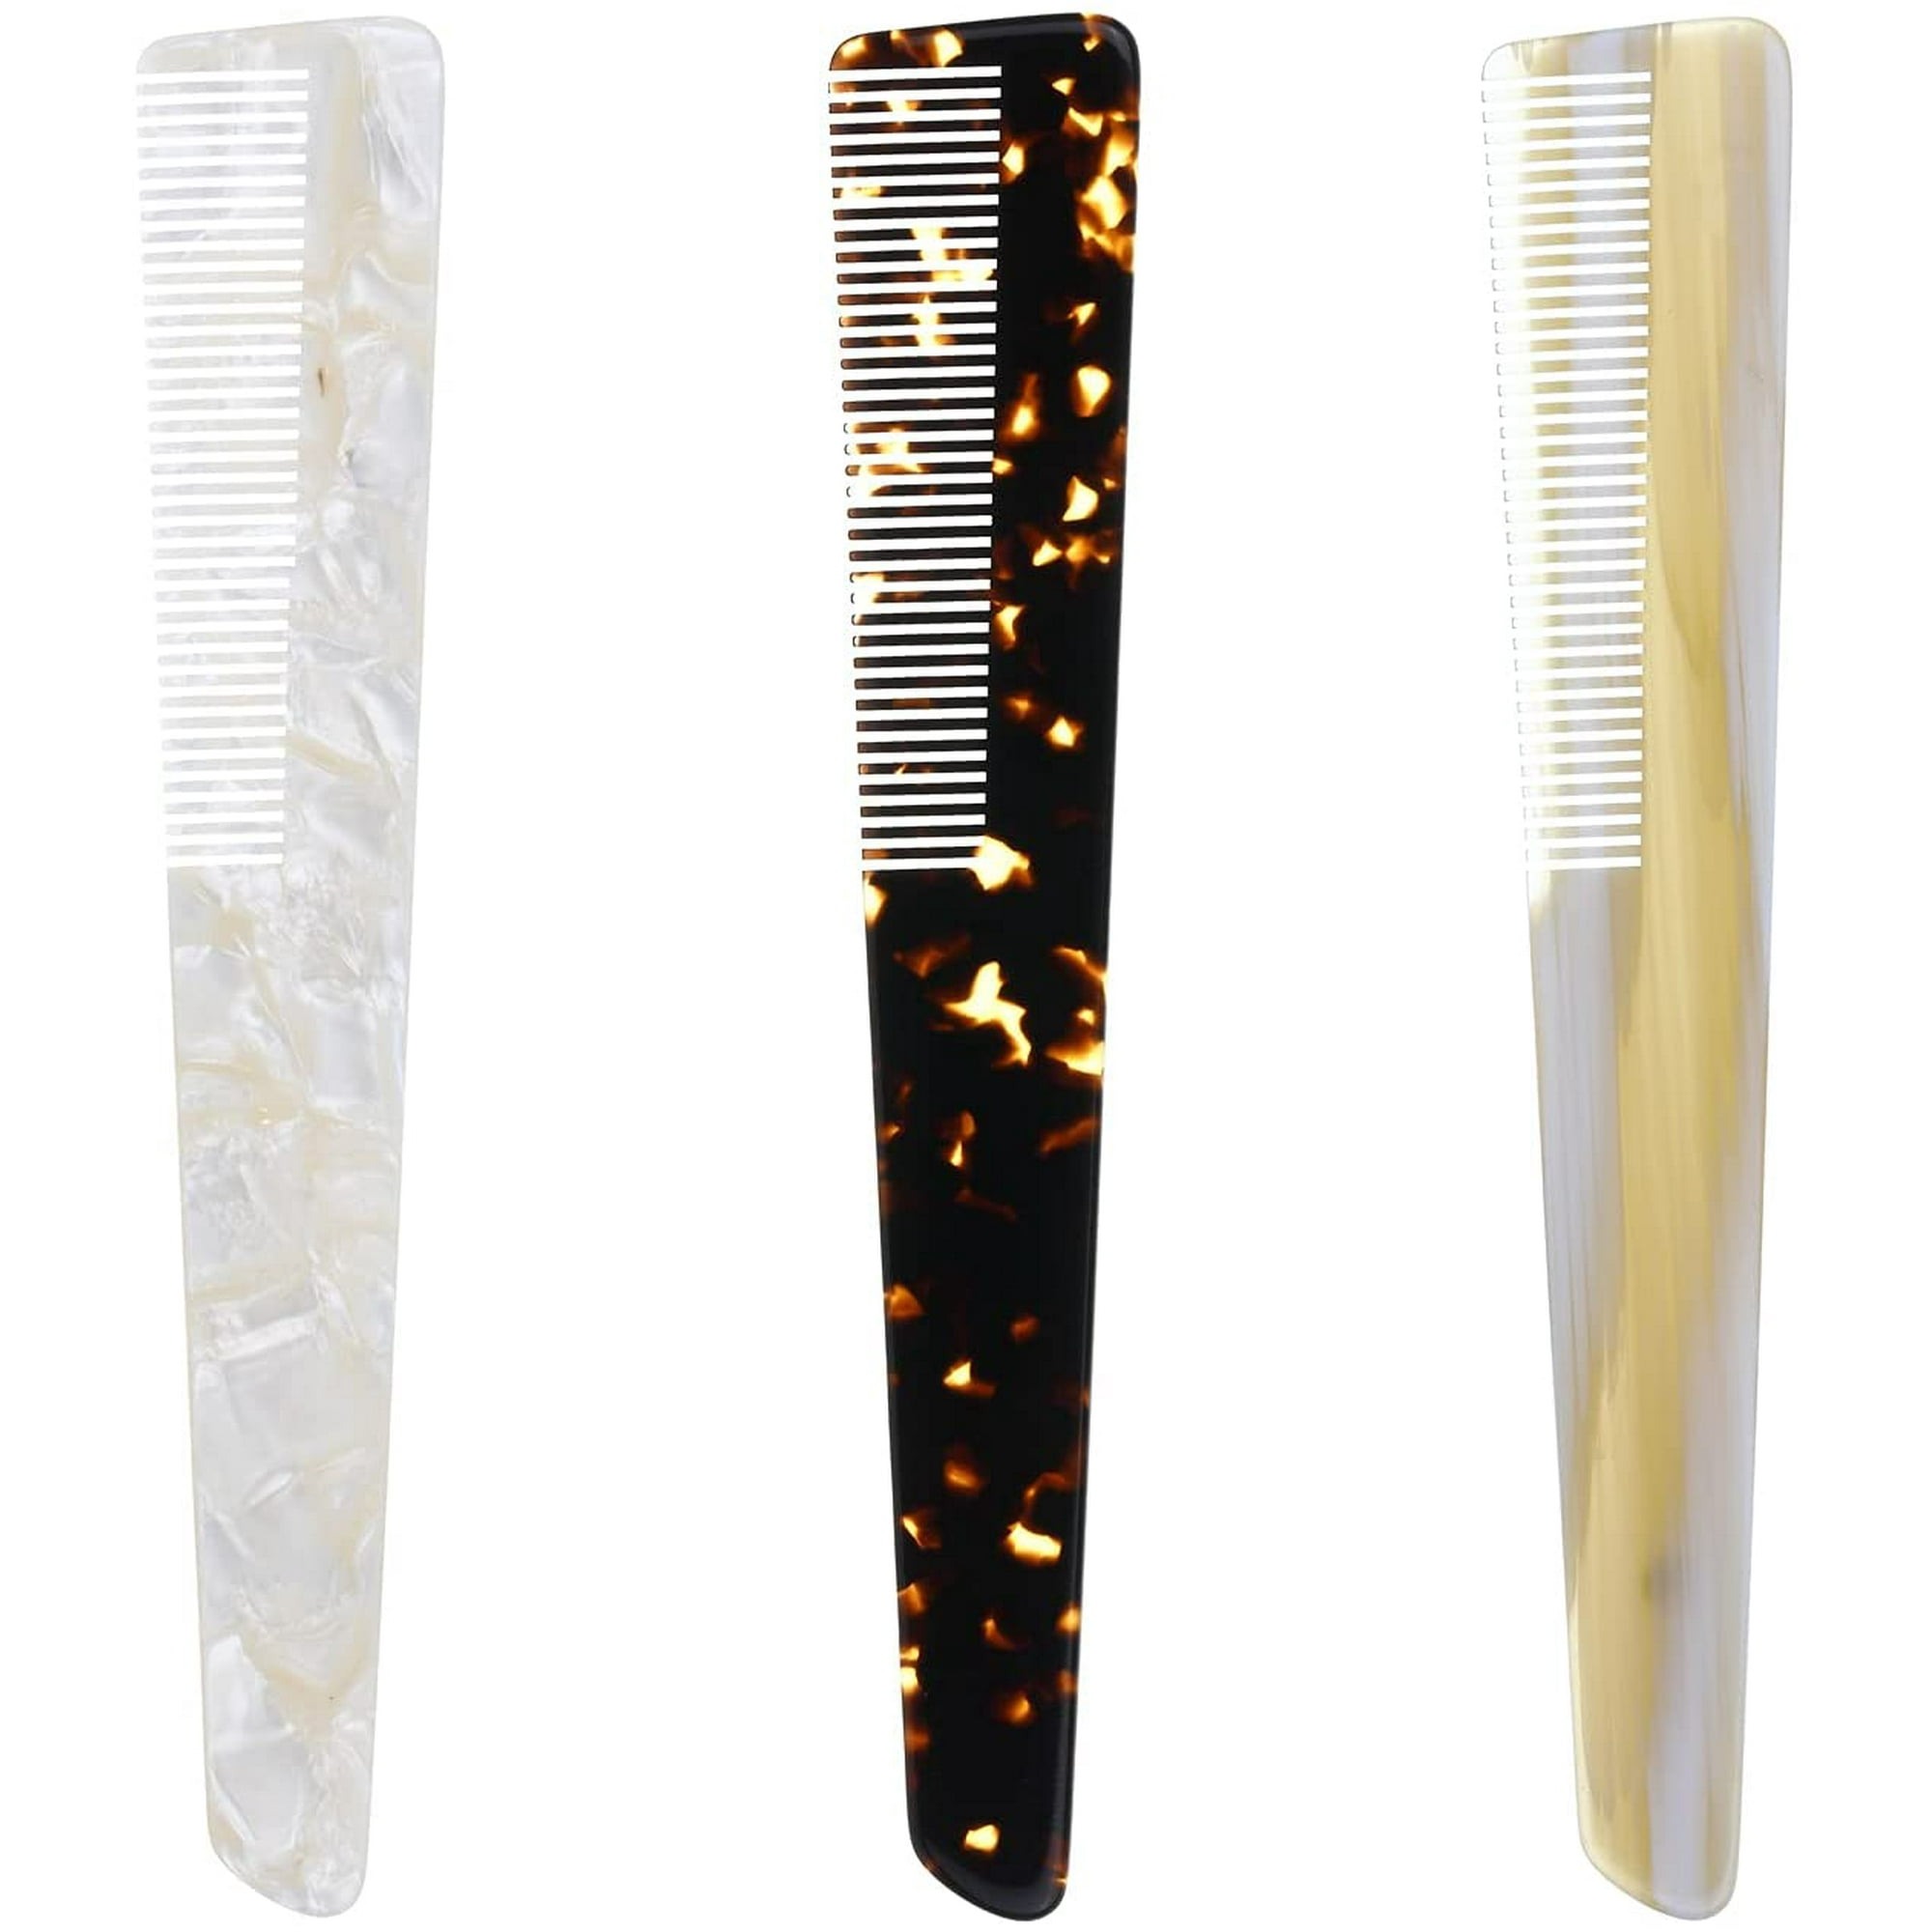 Acetate hair comb set anti-static hair comb male and female styling tools |  Walmart Canada